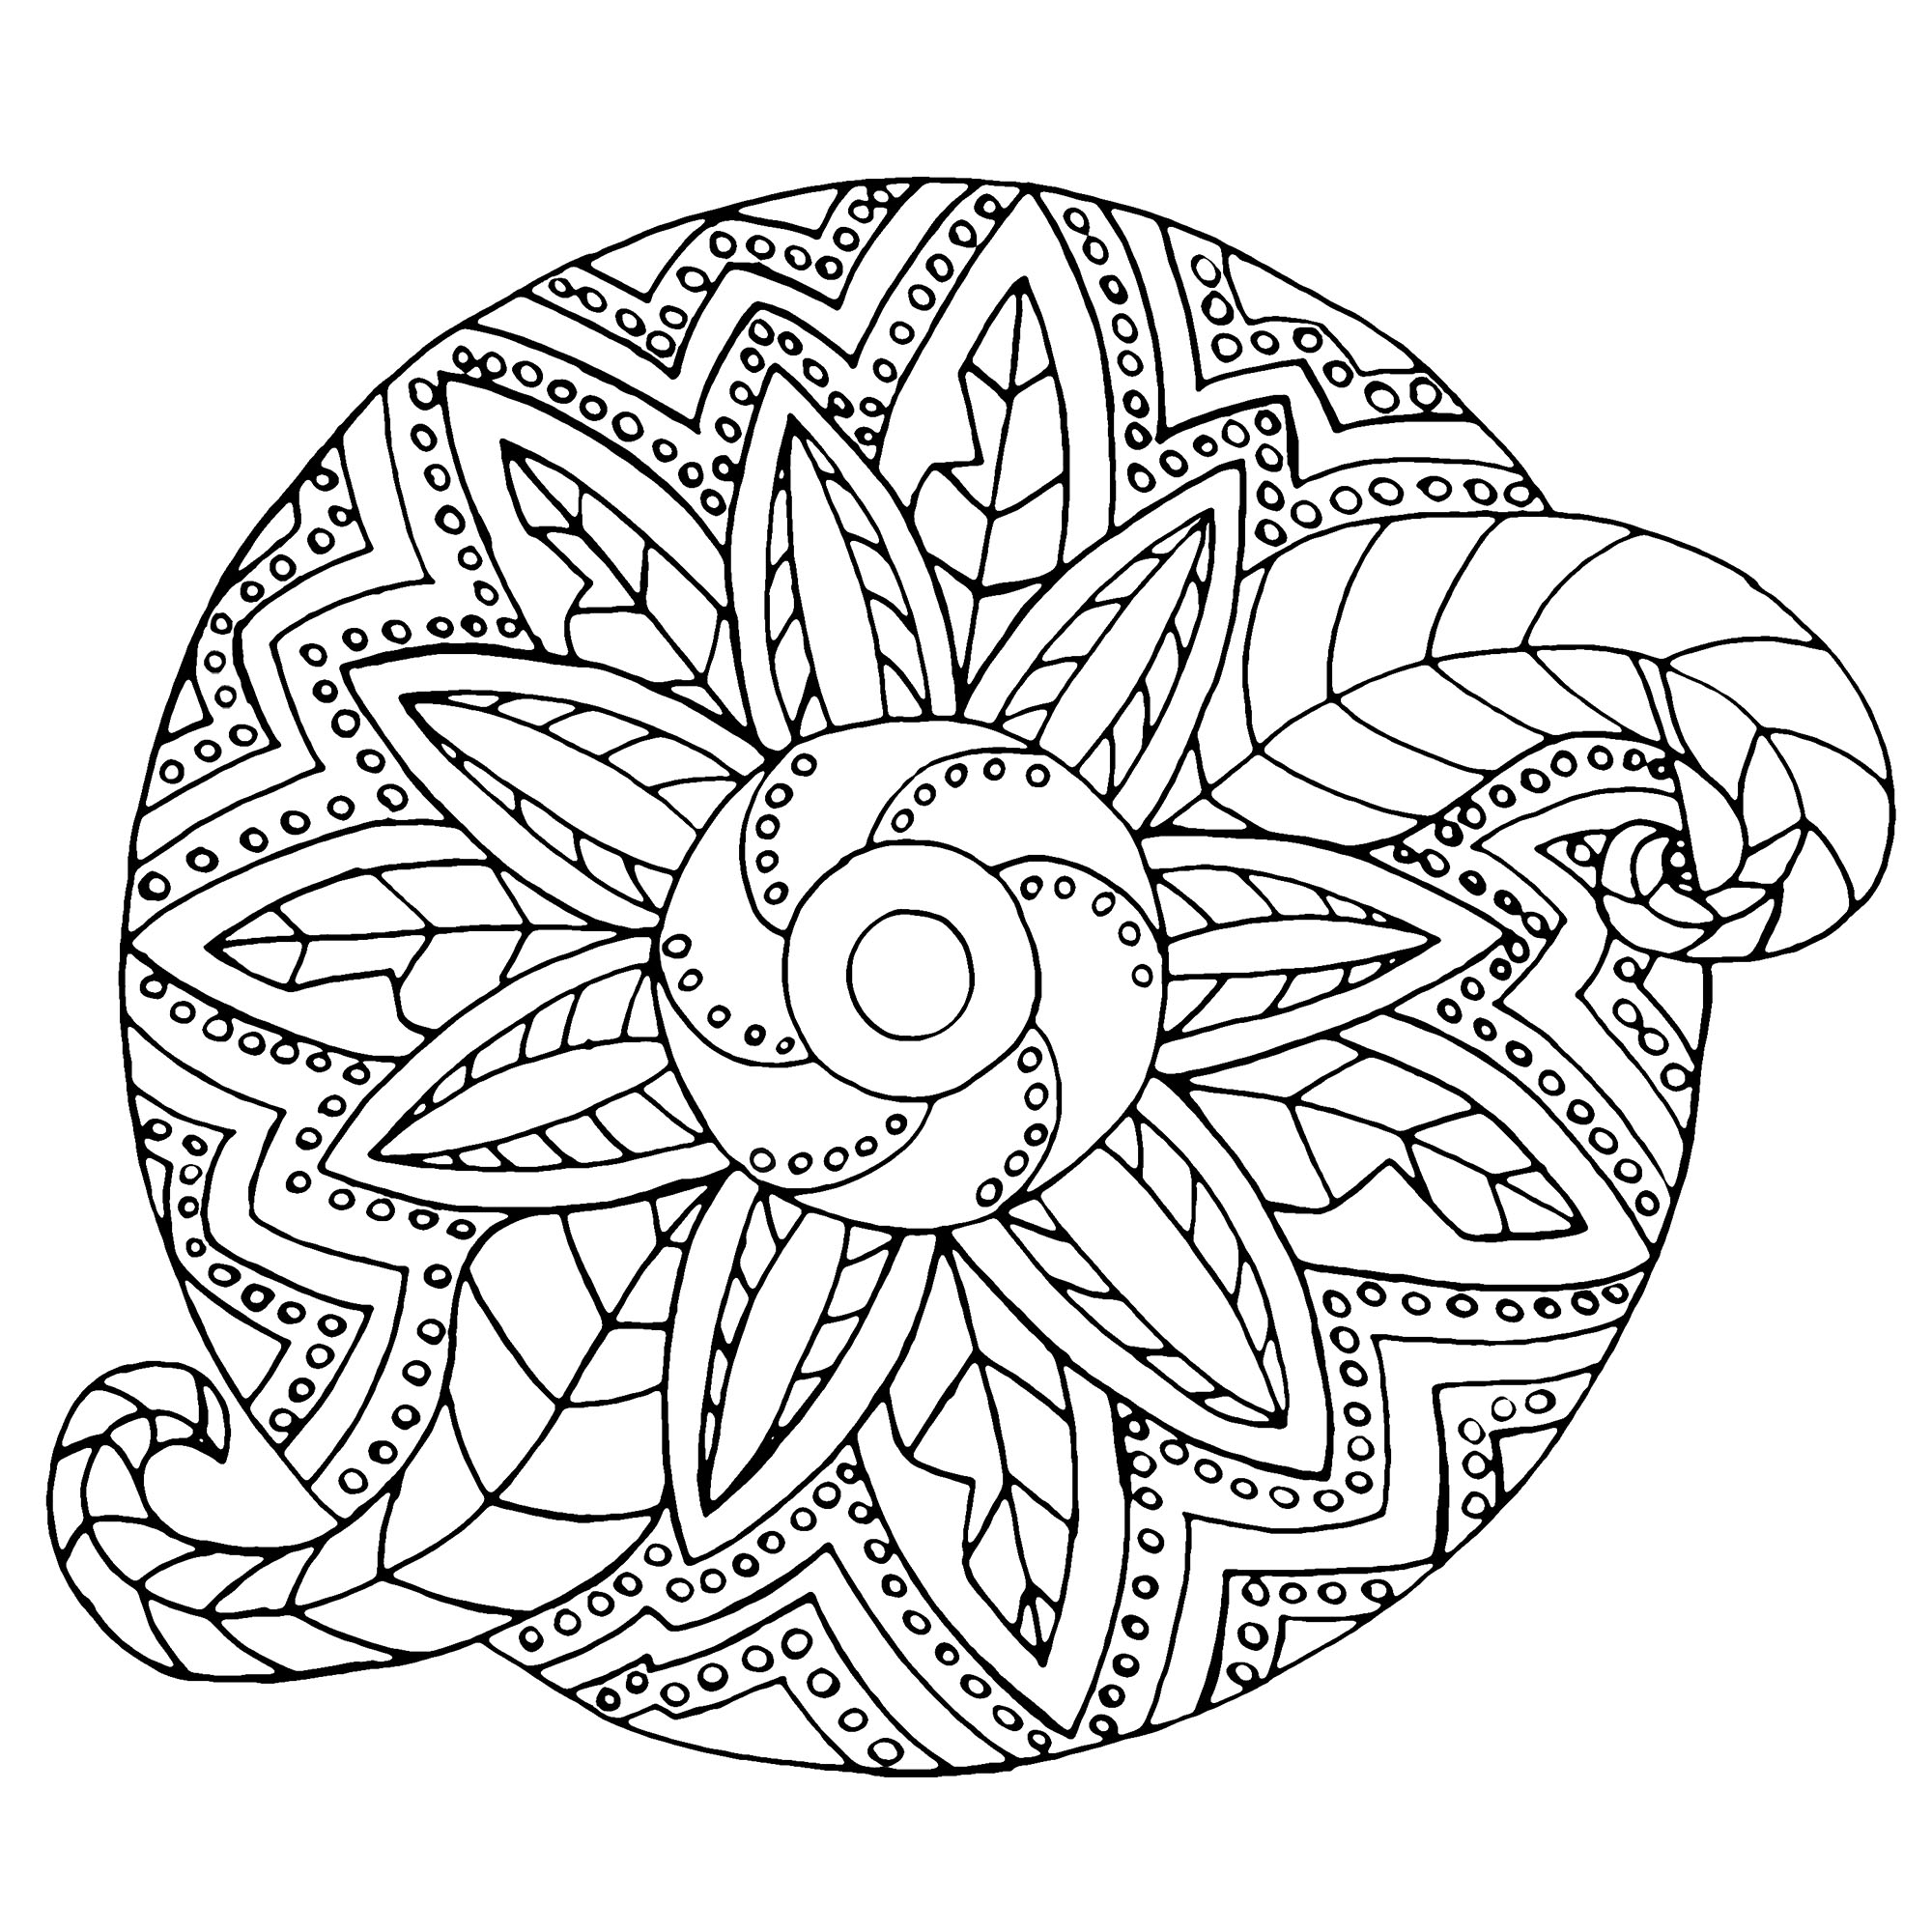 A Mandala mixing metallic and vegetable forms